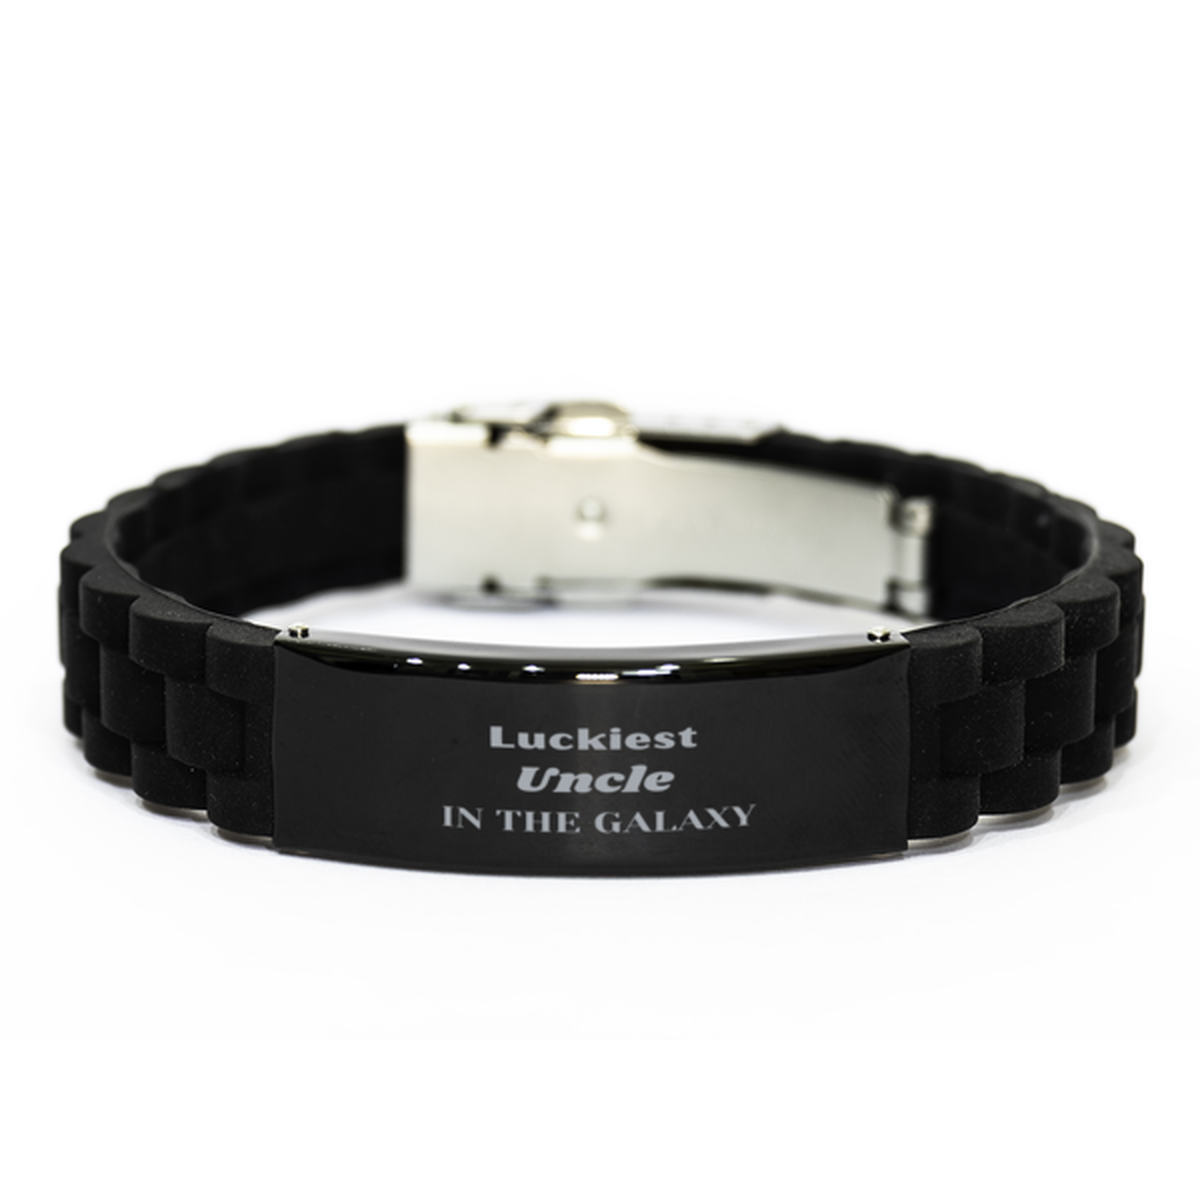 Luckiest Uncle in the Galaxy, To My Uncle Engraved Gifts, Christmas Uncle Black Glidelock Clasp Bracelet Gifts, X-mas Birthday Unique Gifts For Uncle Men Women